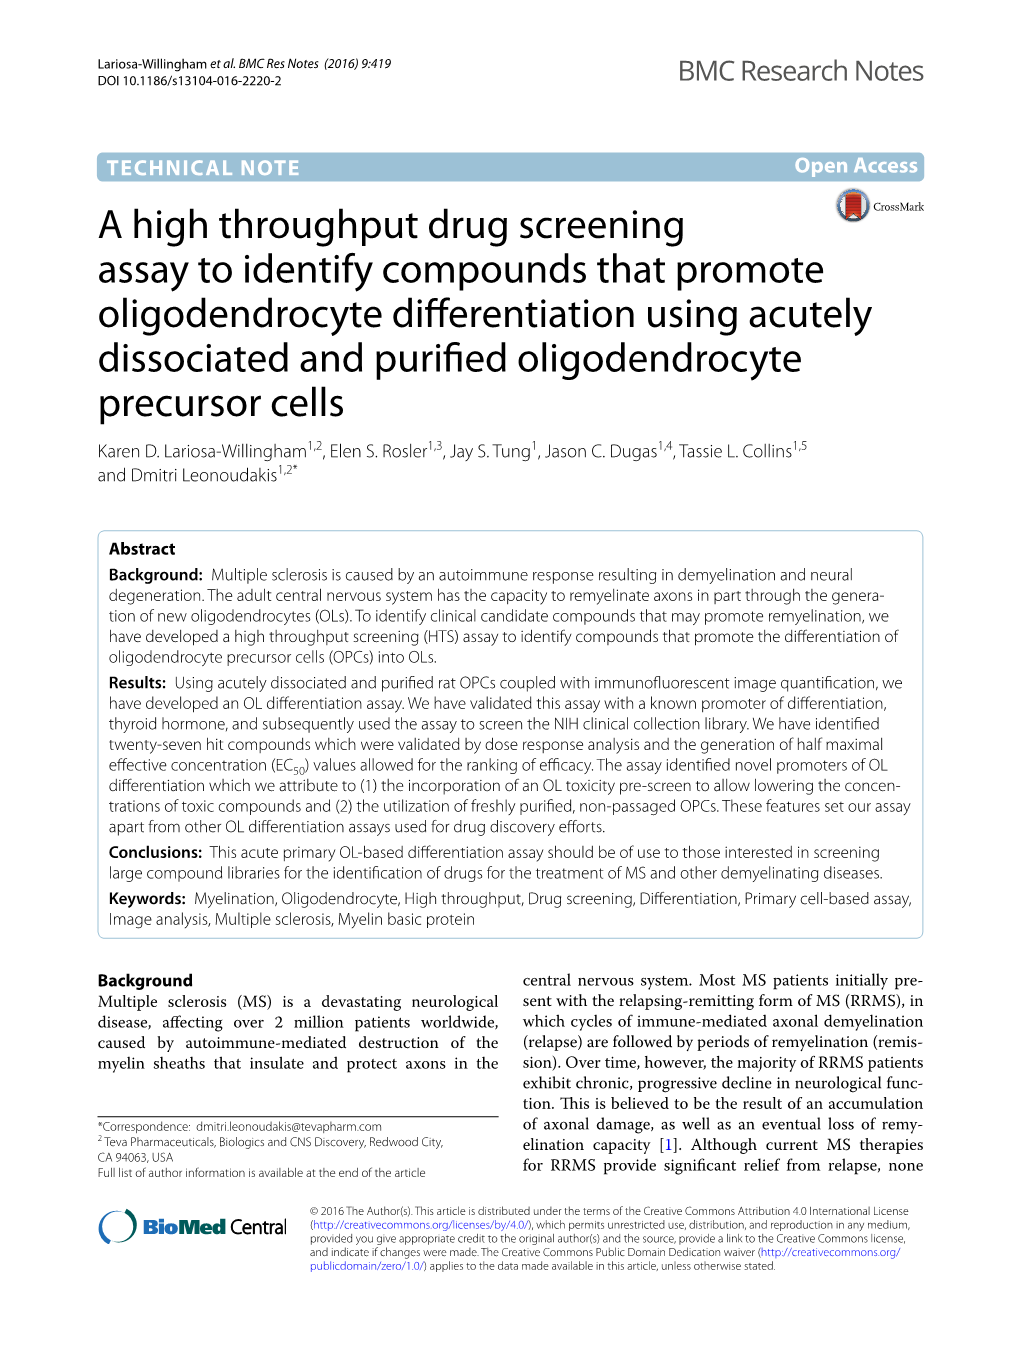 A High Throughput Drug Screening Assay to Identify Compounds That